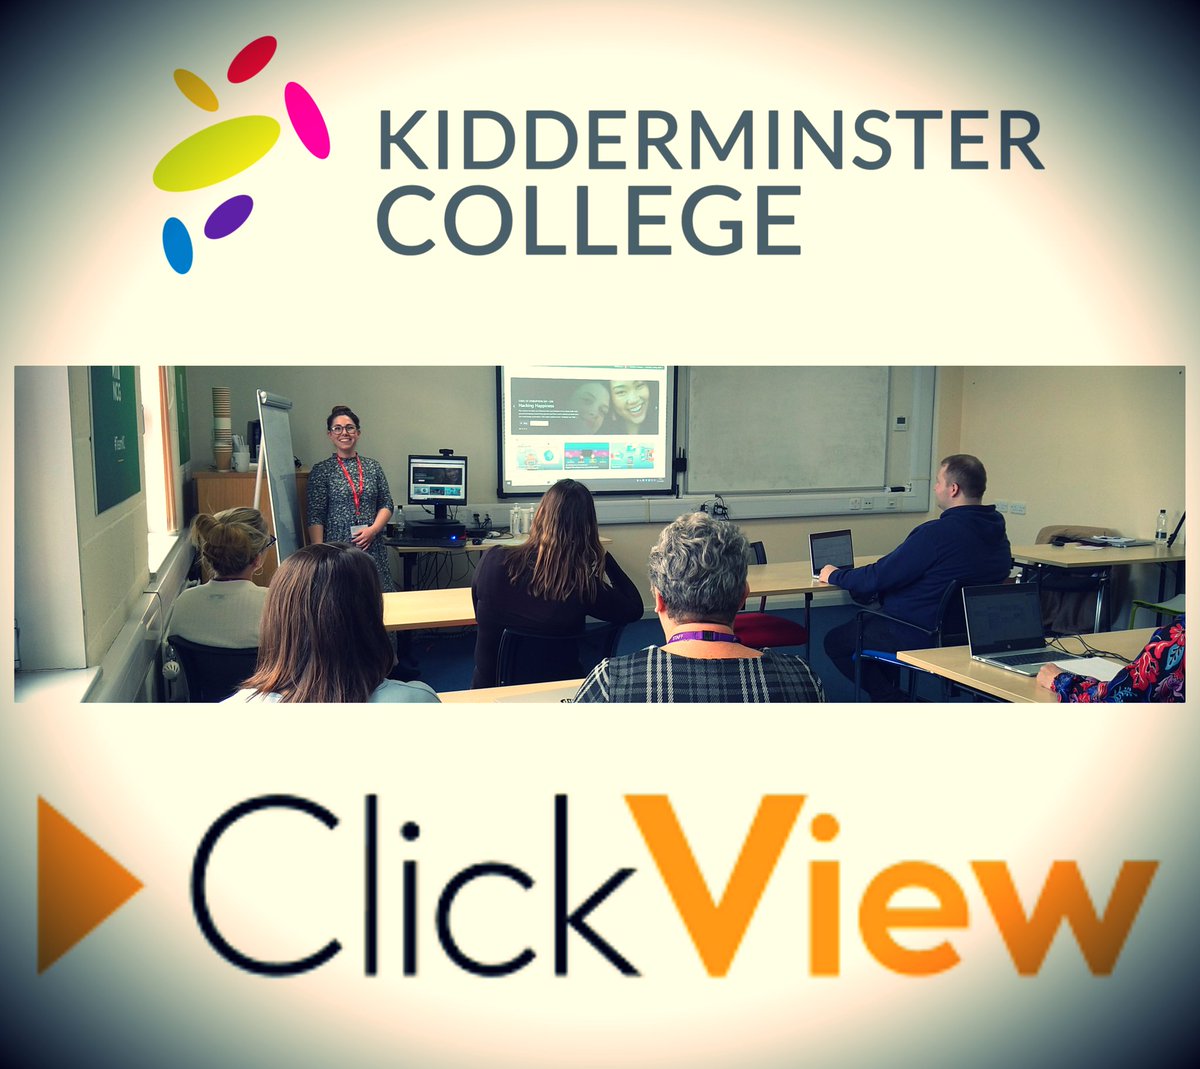 Great to have @ClickViewHelen from @ClickViewUK running sessions for our @KidderminstColl staff, helping us embed great video resources to enhance our teaching and learning. Very motivational, thank you! @NCG_Official #edtech